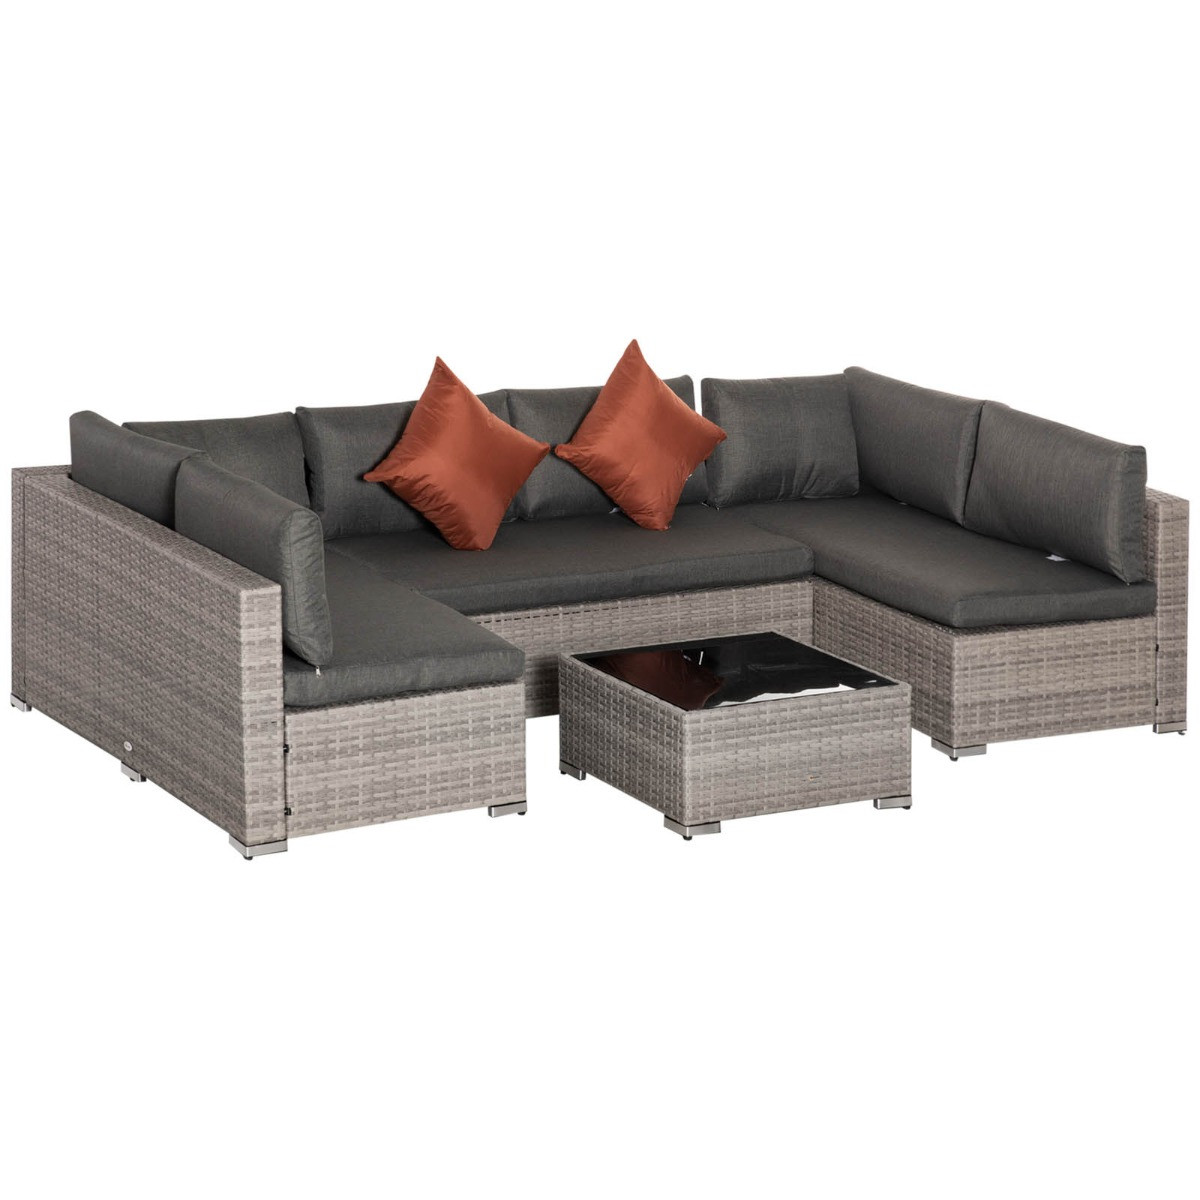 Outsunny Wicker Rattan Sofa Set With Coffee Table, Grey - 6 Seater>